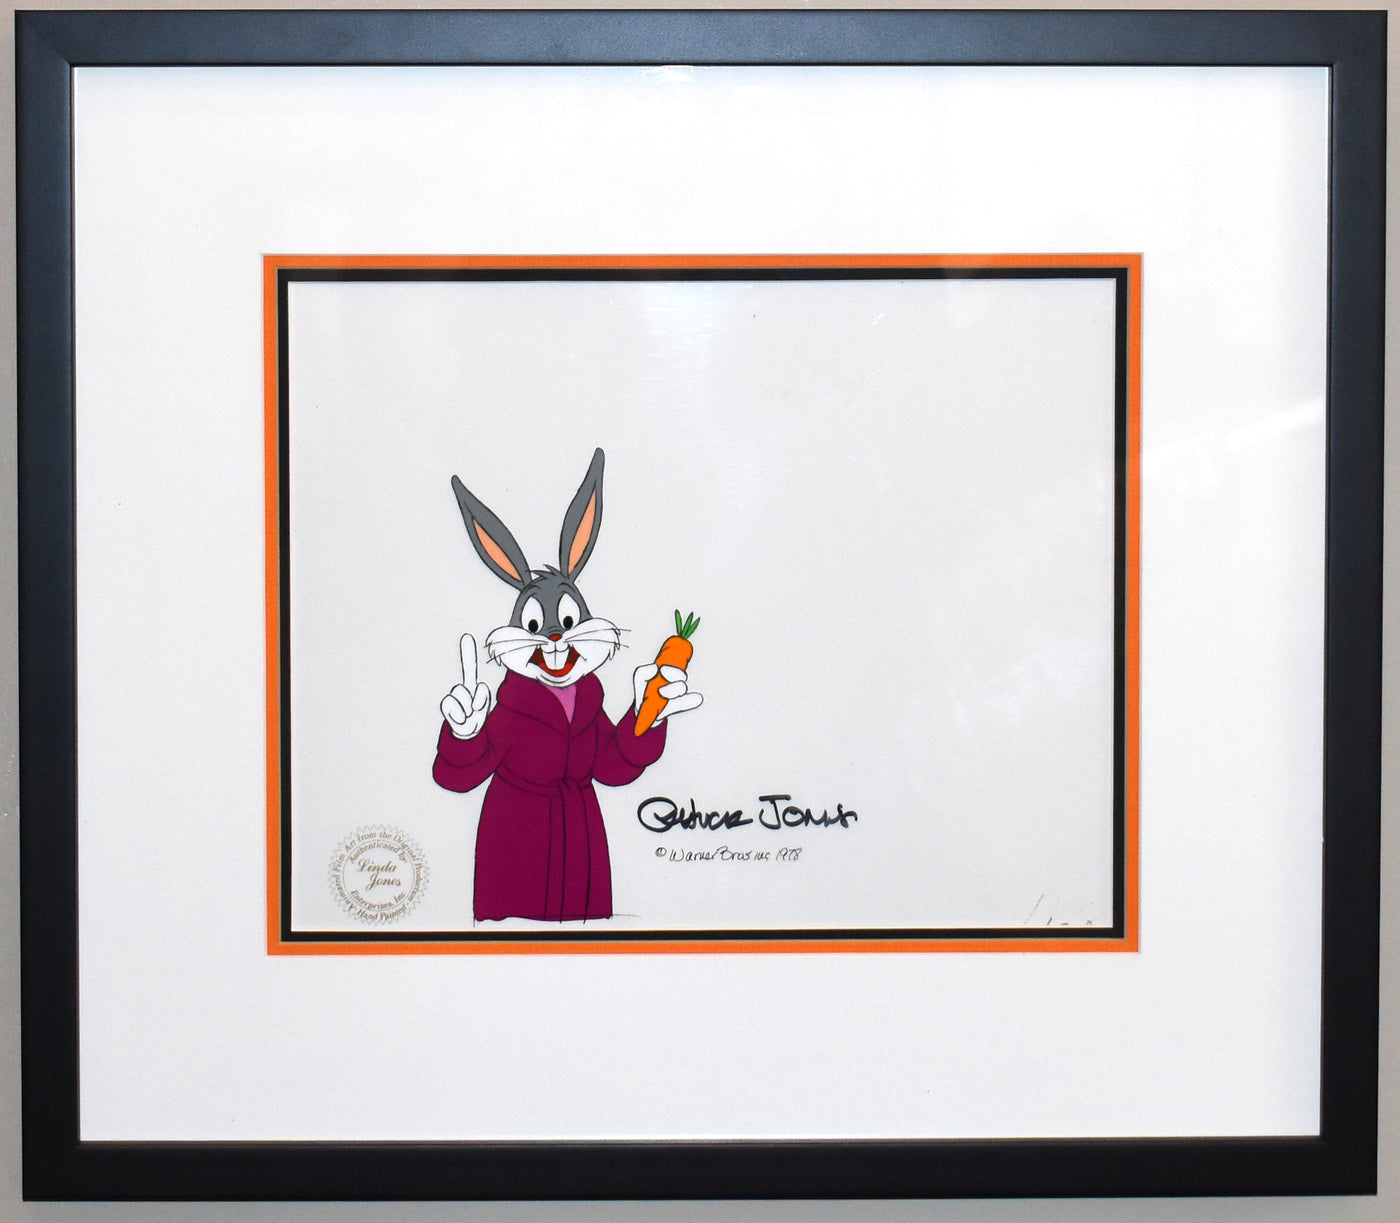 Original Warner Brothers Production Cel Featuring Bugs Bunny, Signed by Chuck Jones